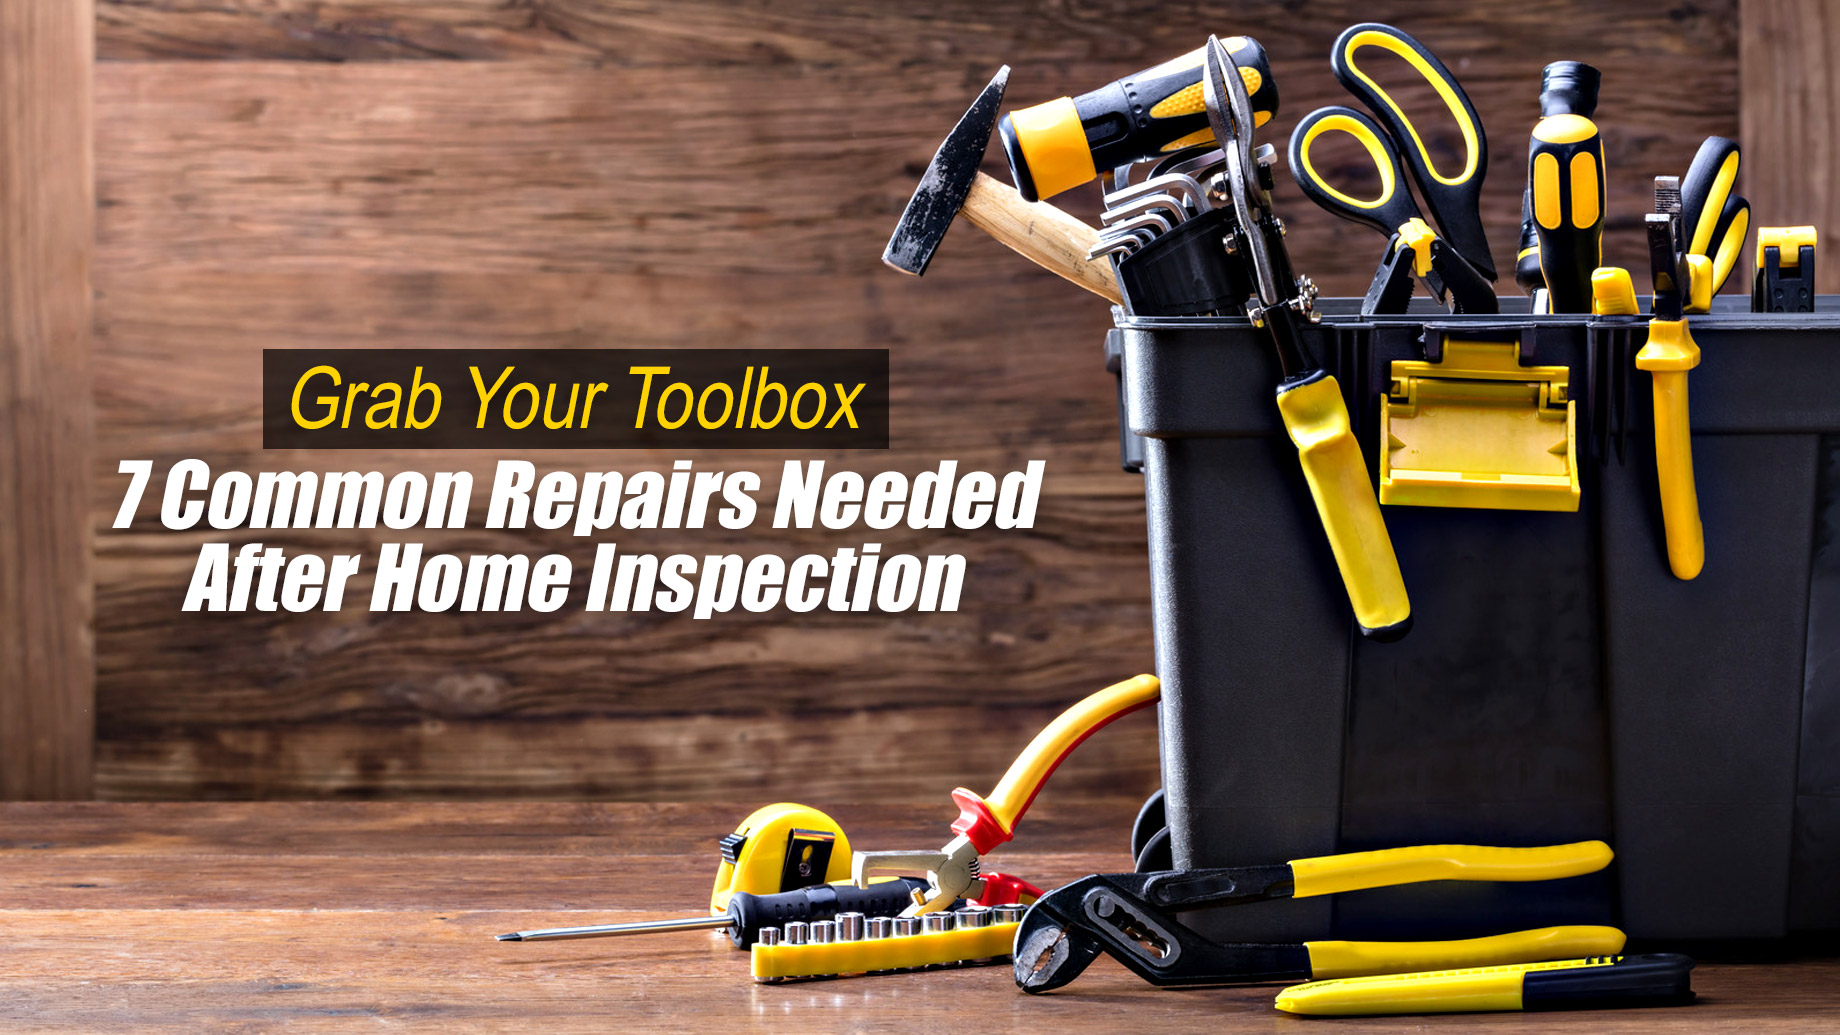 Grab Your Toolbox - 7 Common Repairs Needed After Home Inspection